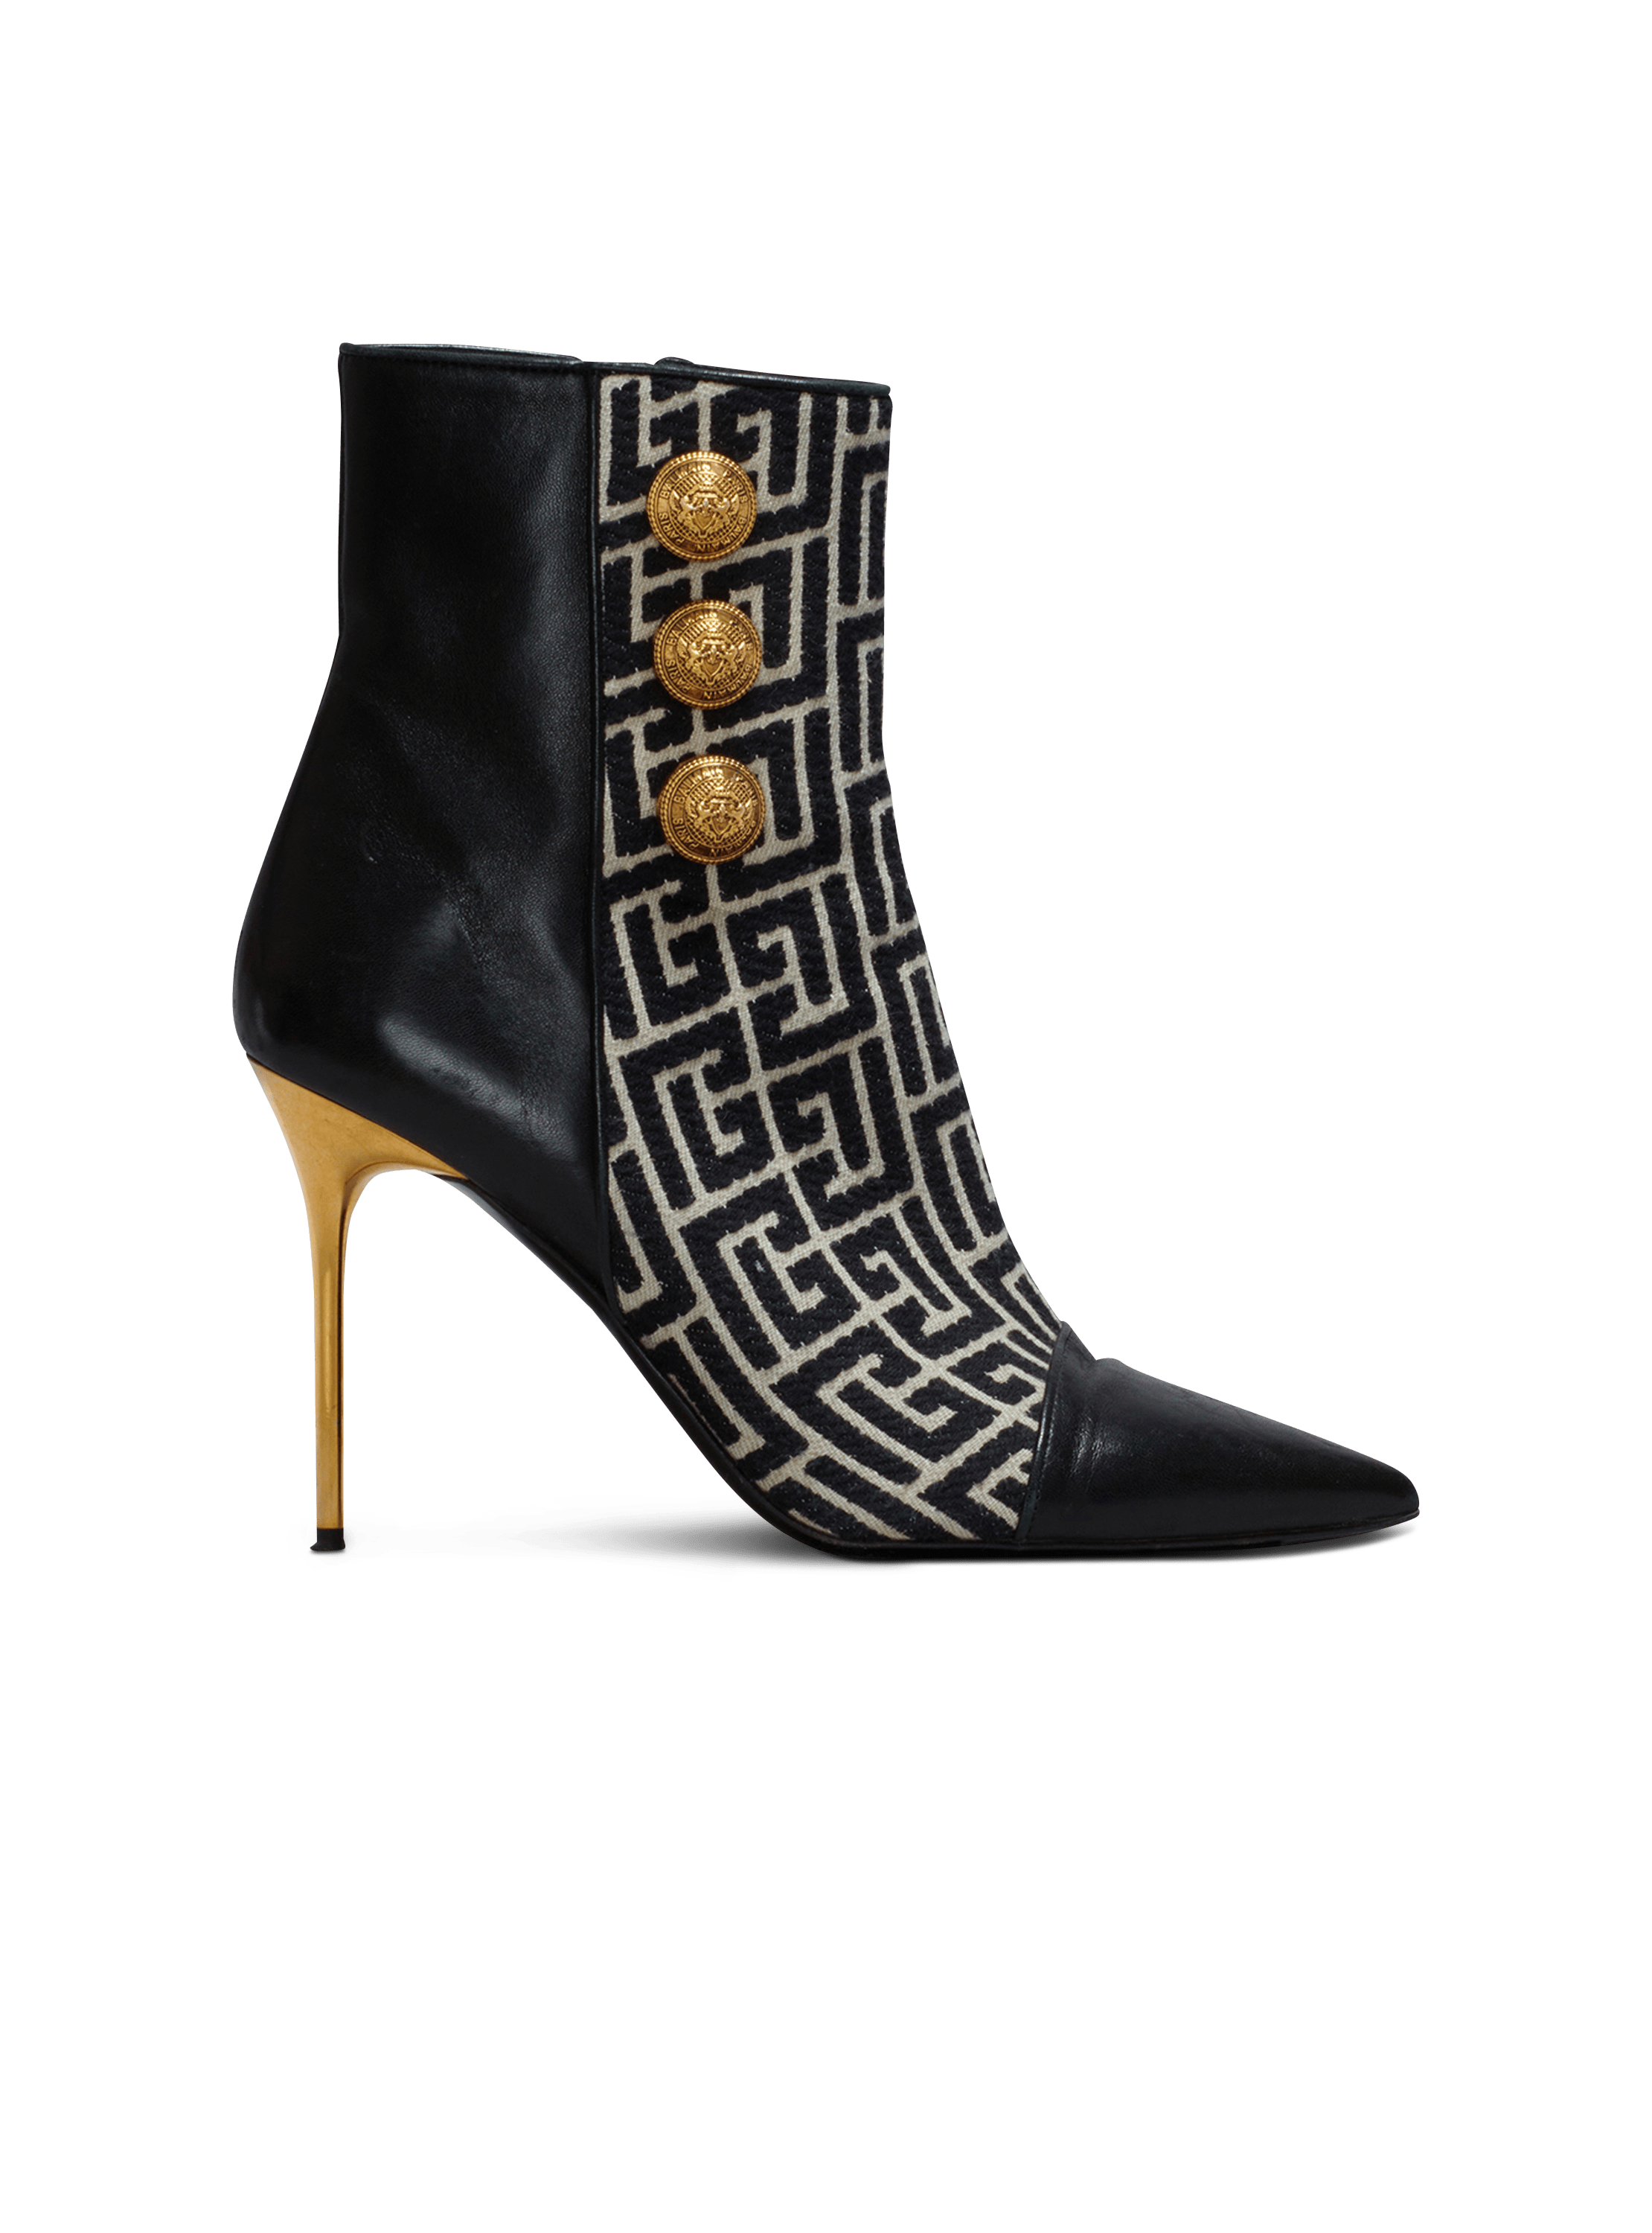 Heritage and Elegance: Pierre Balmain Ankle Boot Designs